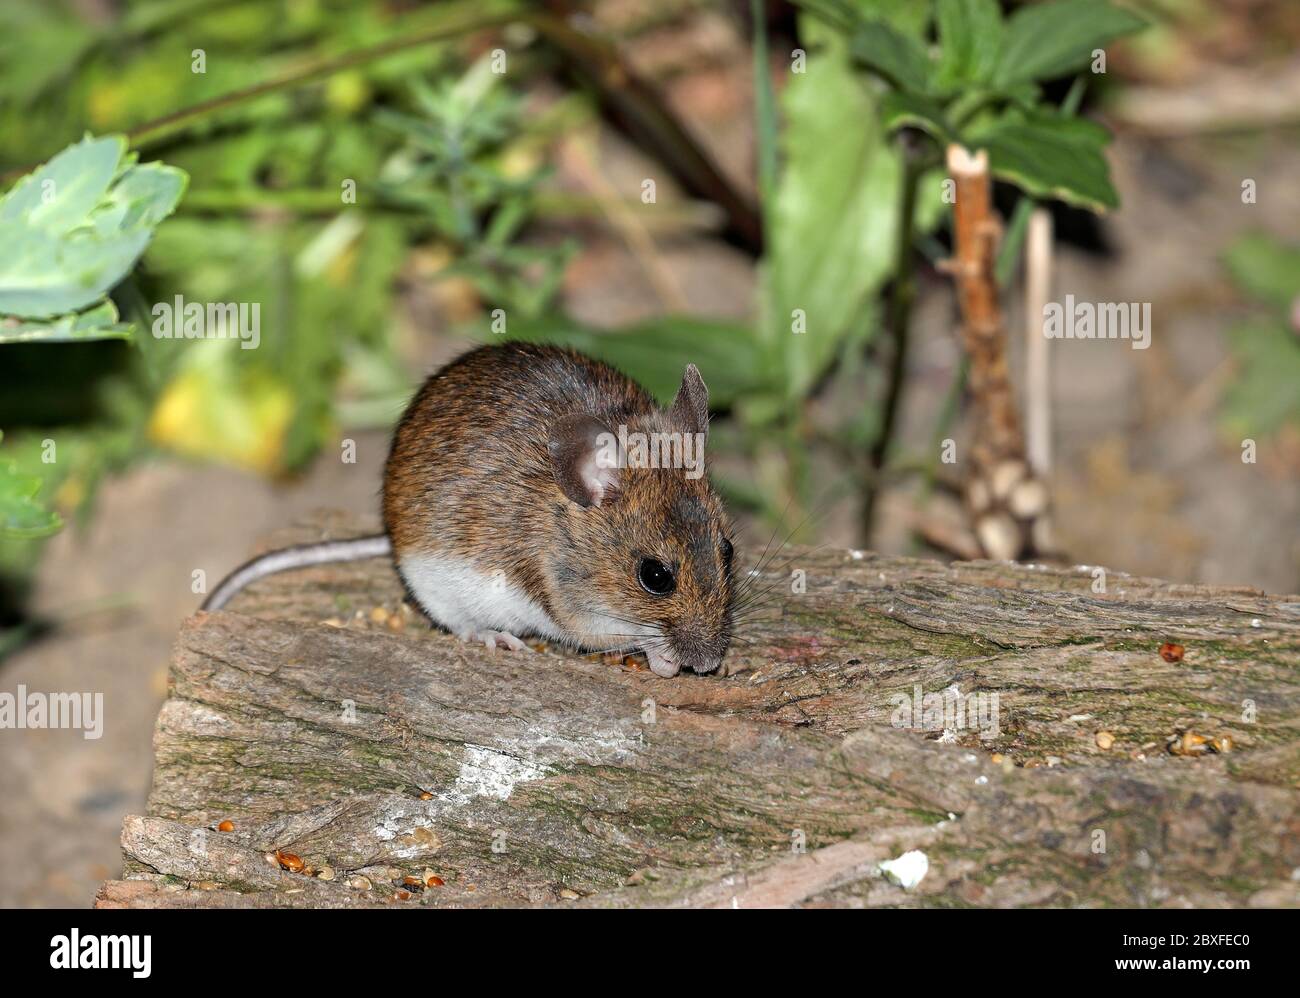 Wood Mouse (Apodemus sylvaticus) Eating Seeds, Royaume-Uni Banque D'Images